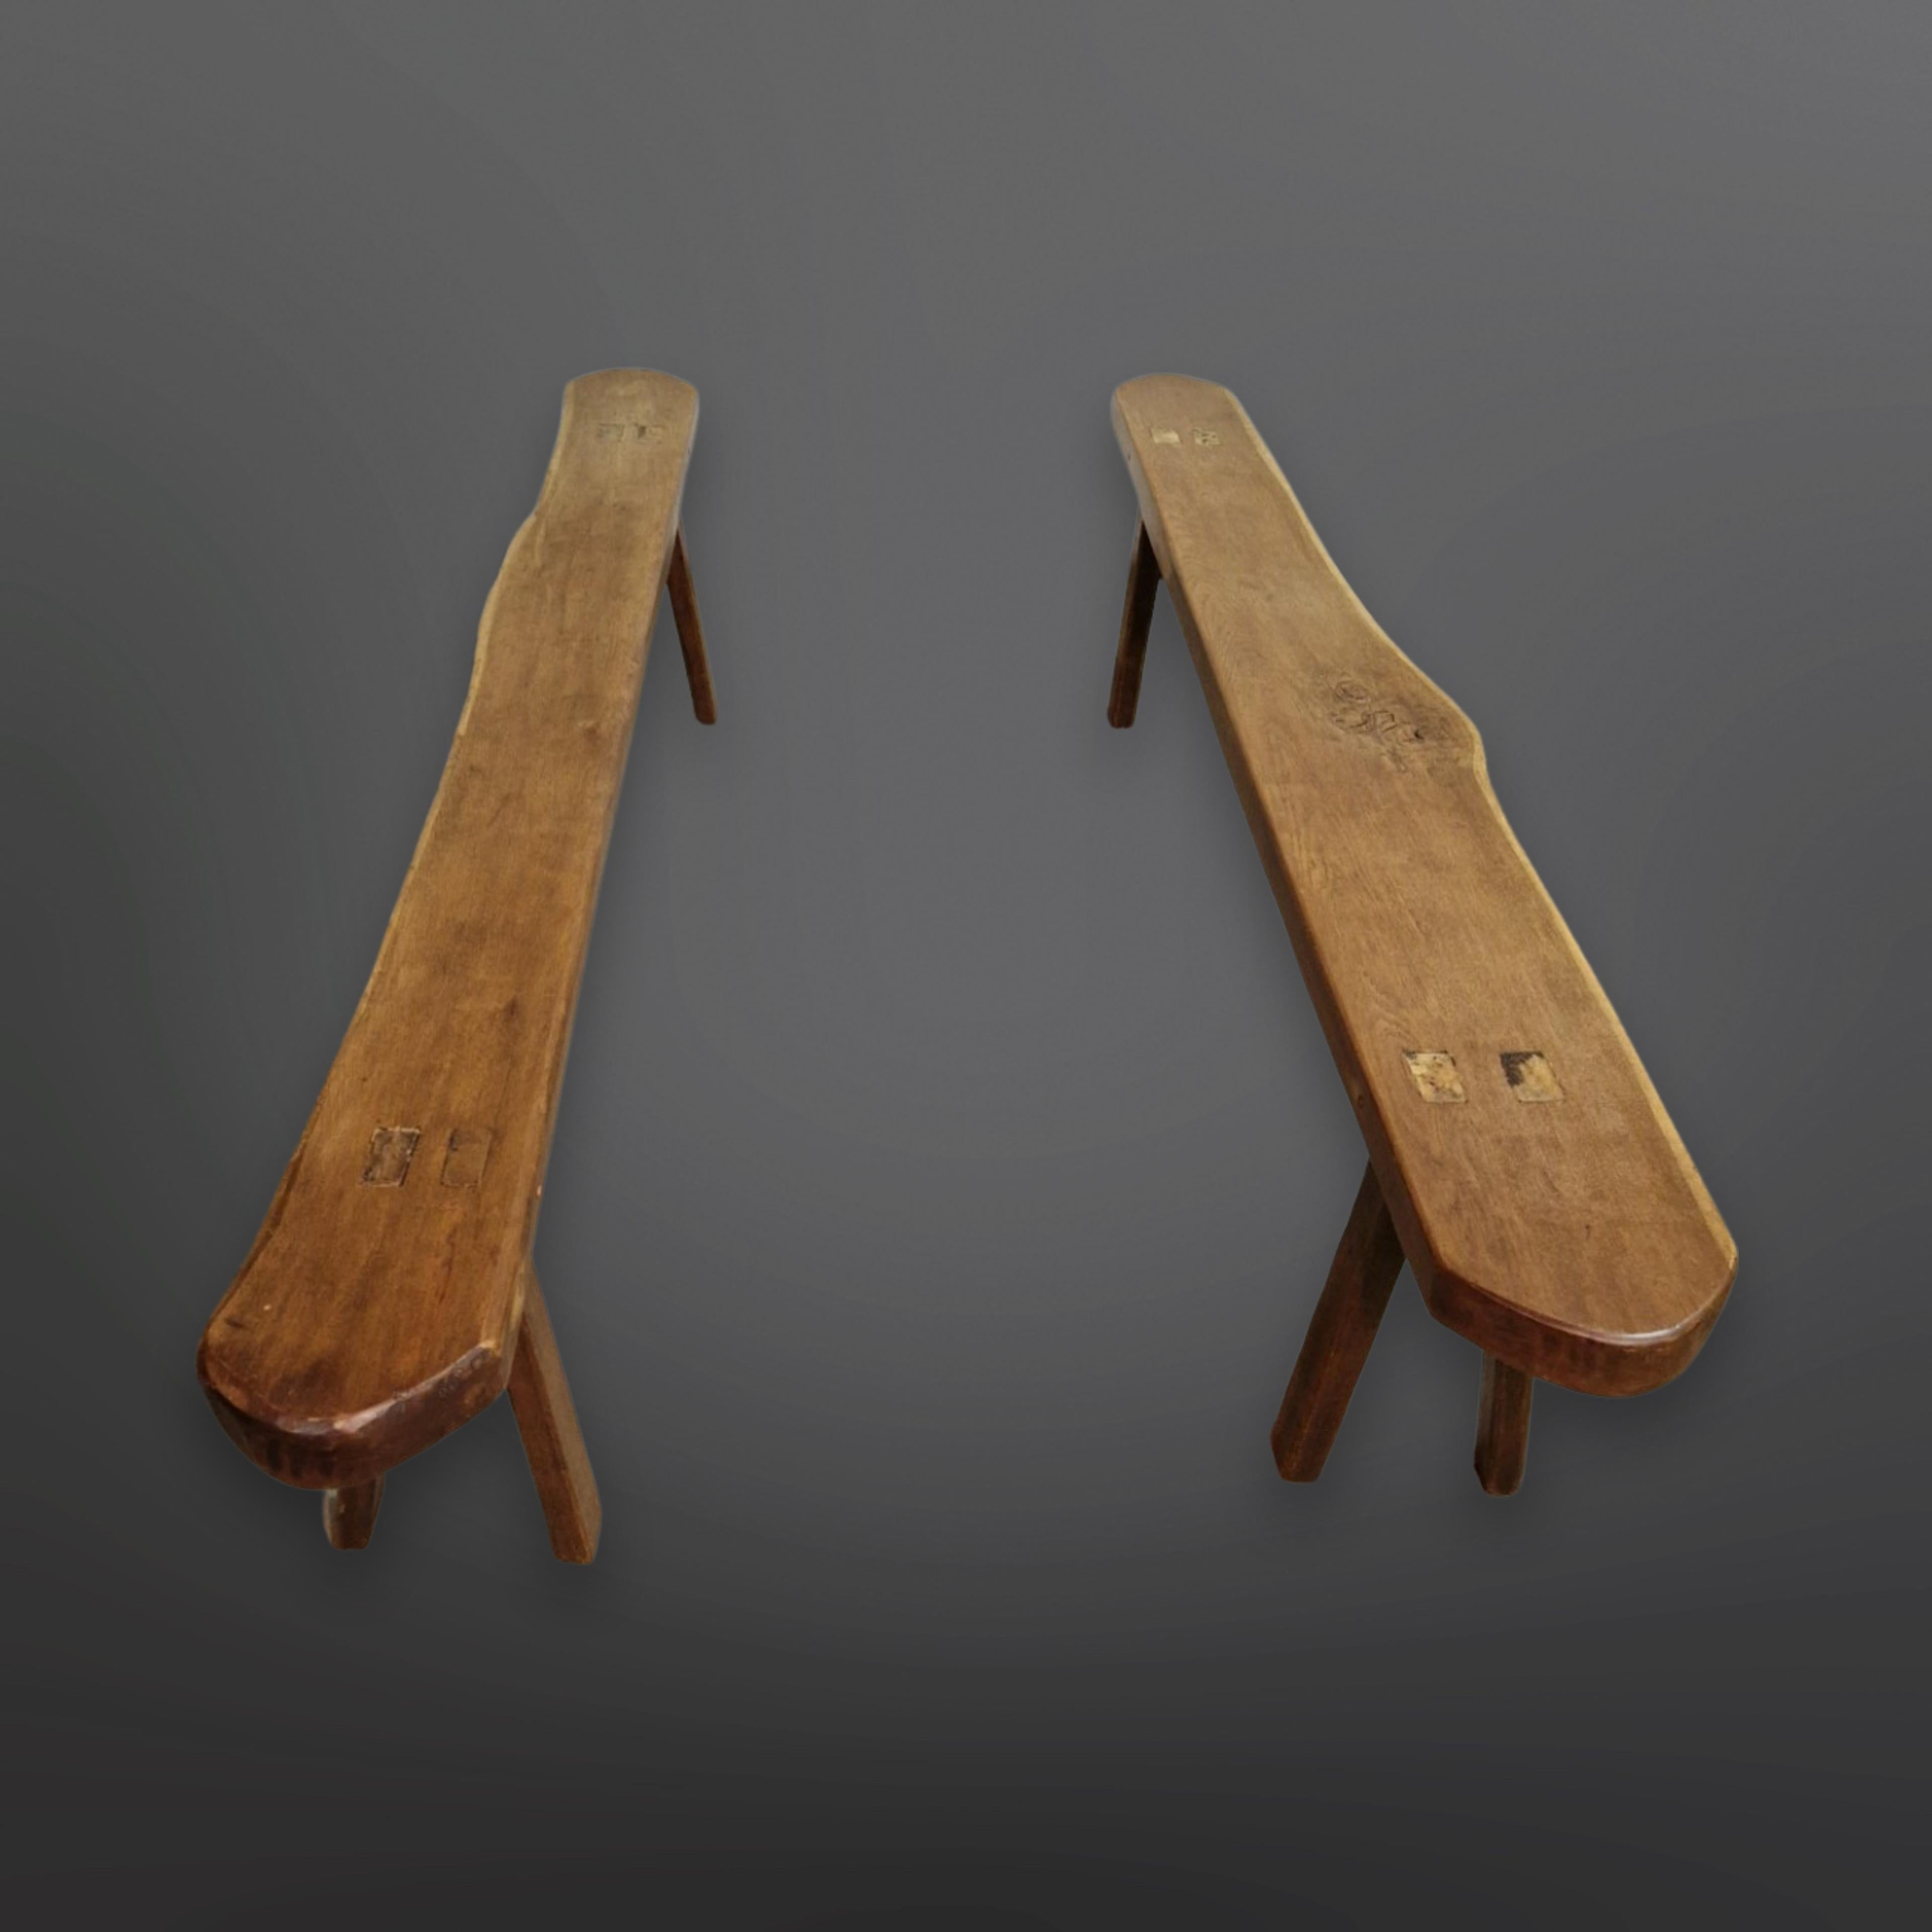 Set of two rustic wabi sabi benches. They are made from solid oak. The seats are made from a single piece of wood. The legs have been fitted through the wood. They are different in size and shape due to the natural characteristics of the wood. Both